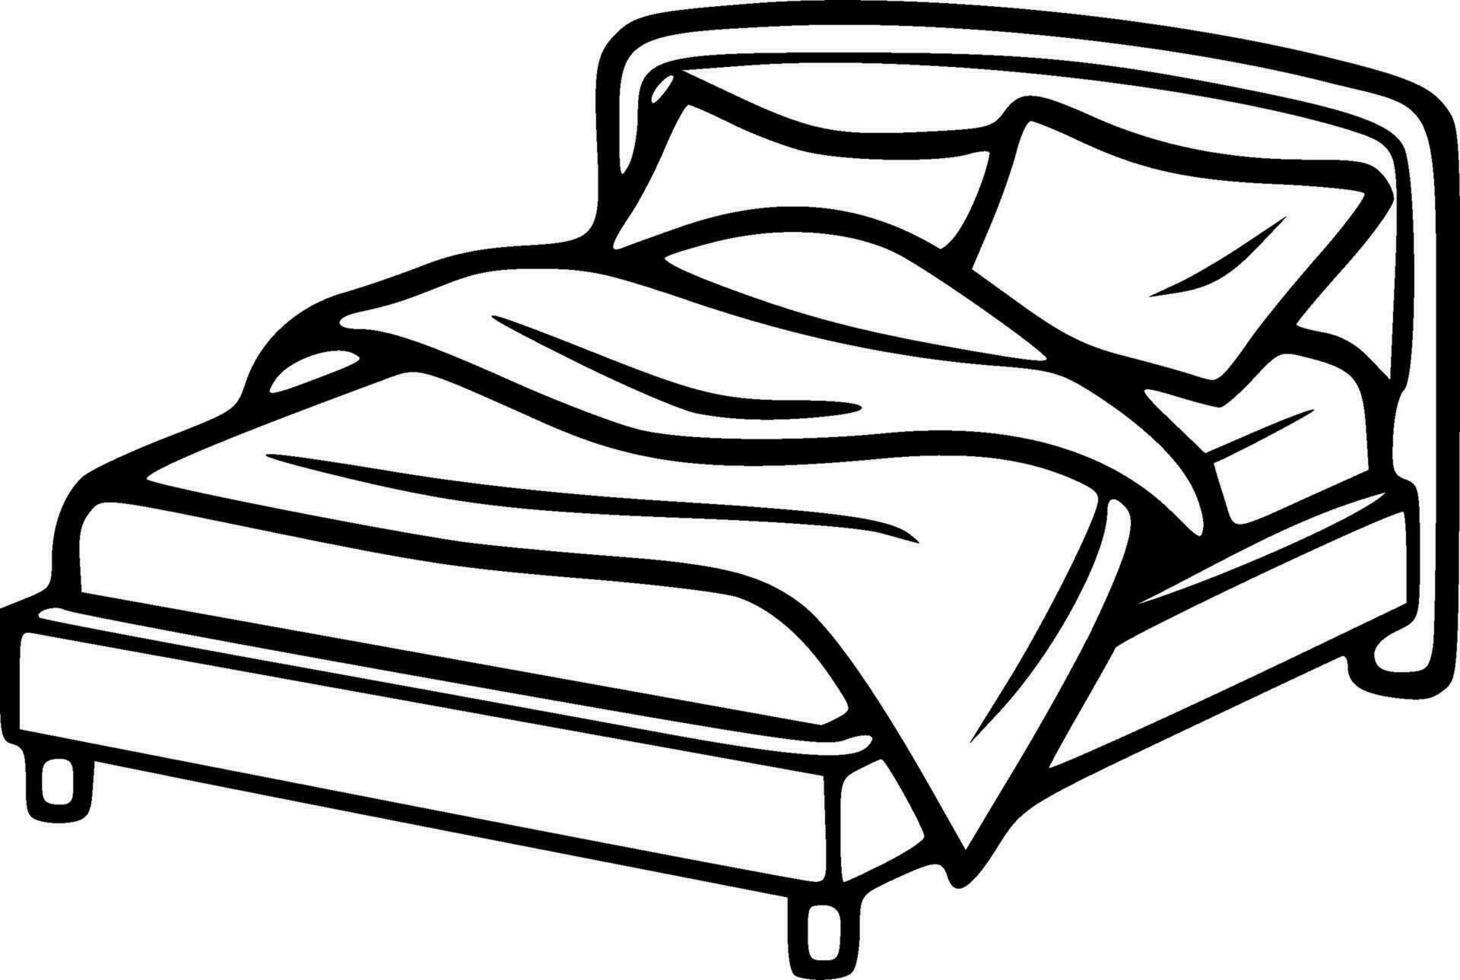 Bed with pillows and blanket black outlines vector illustration